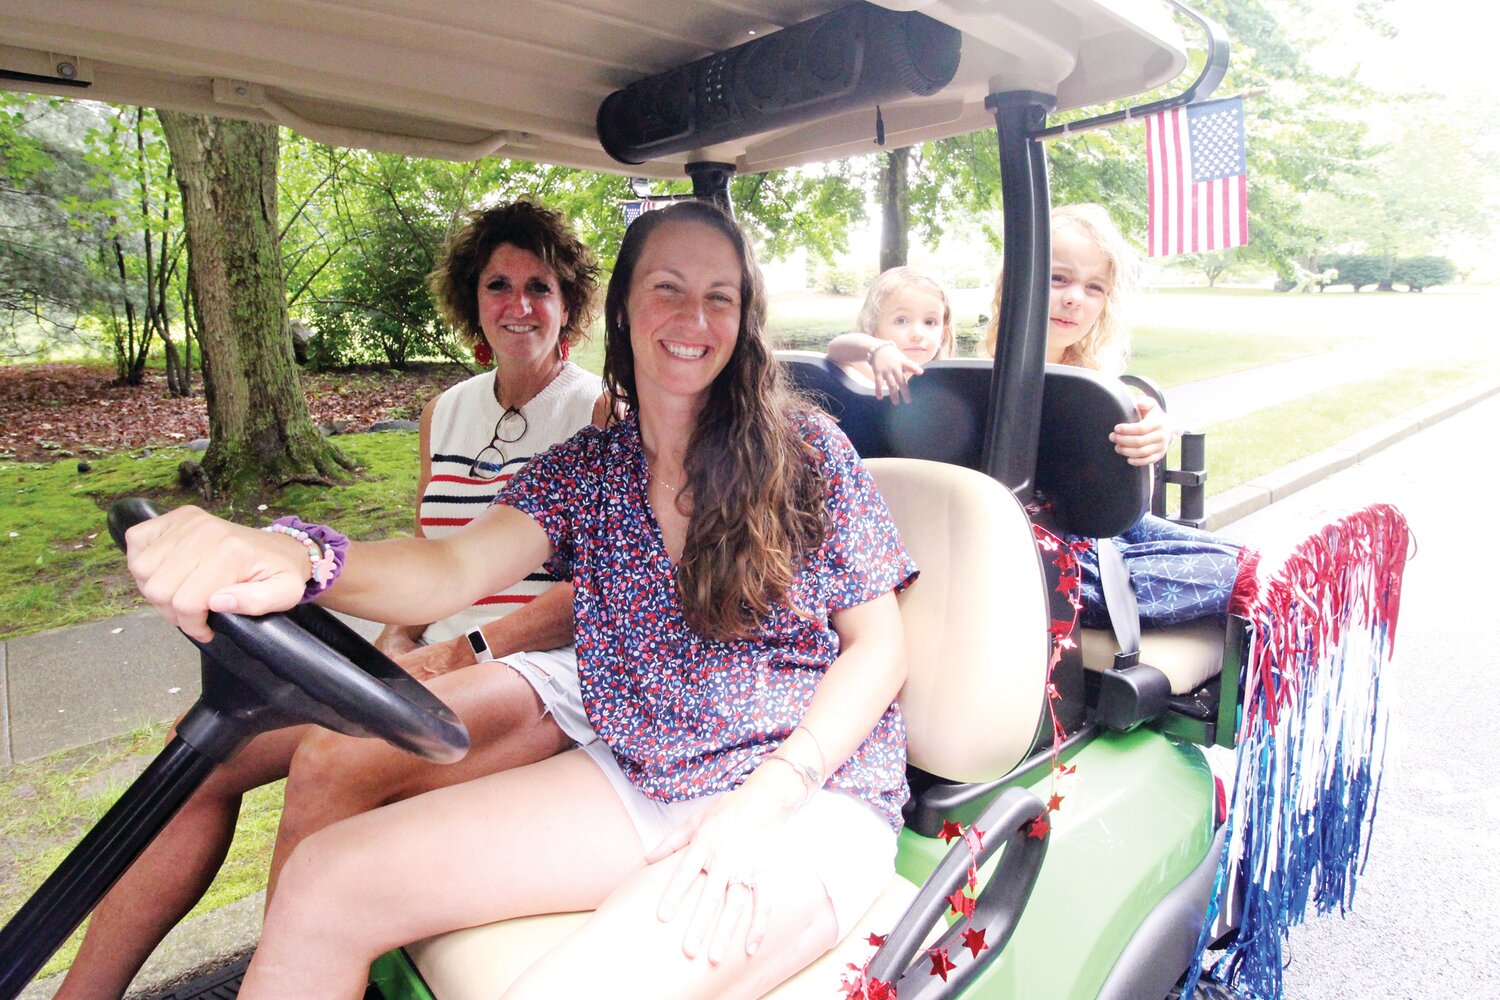 Joan Allen decked out her golf cart so that she, her daughter Nicole Demir and her daughters Lianna and Theodora could ride in patriotic style in the Warwick Neck Fourth of July parade. Unfortunately, or maybe it was a good thing since it poured, the parade was canceled. When the sun peeked out by mid morning, the girls couldn’t resist riding the streets of Anglesea.